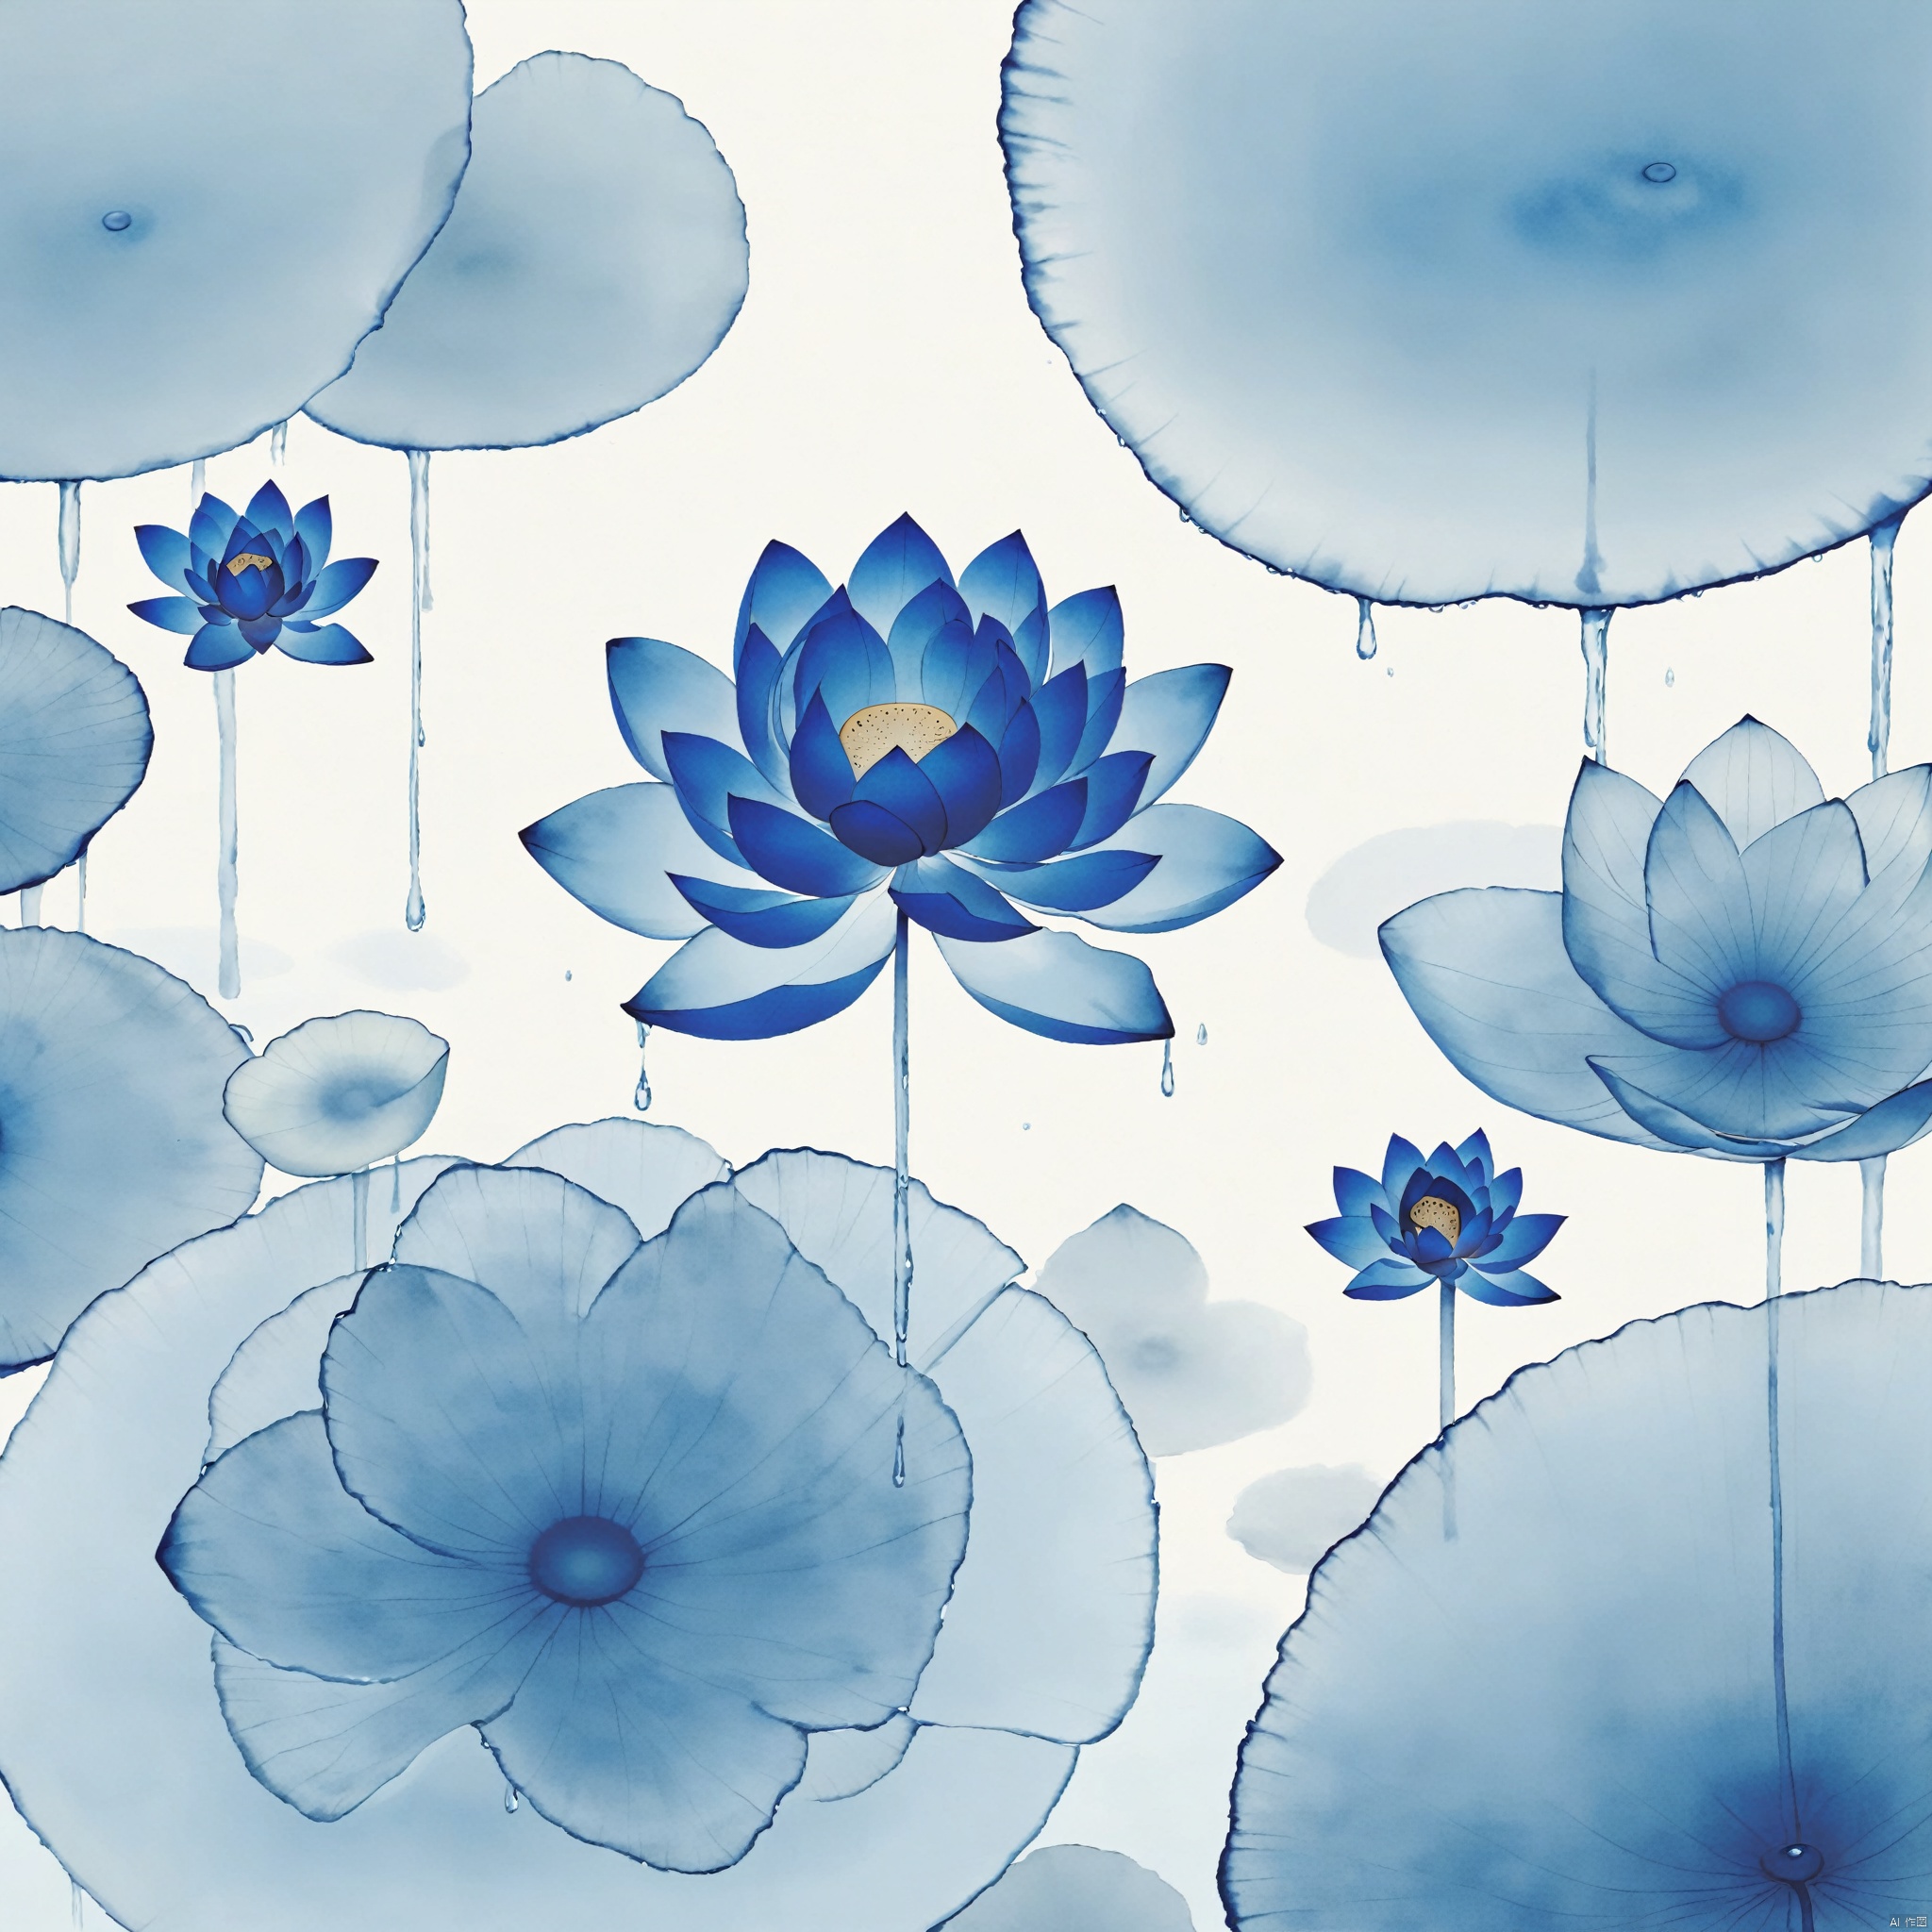  blue theme,Tie dyeing,Frogs, lotus leaves, vines, dripping water